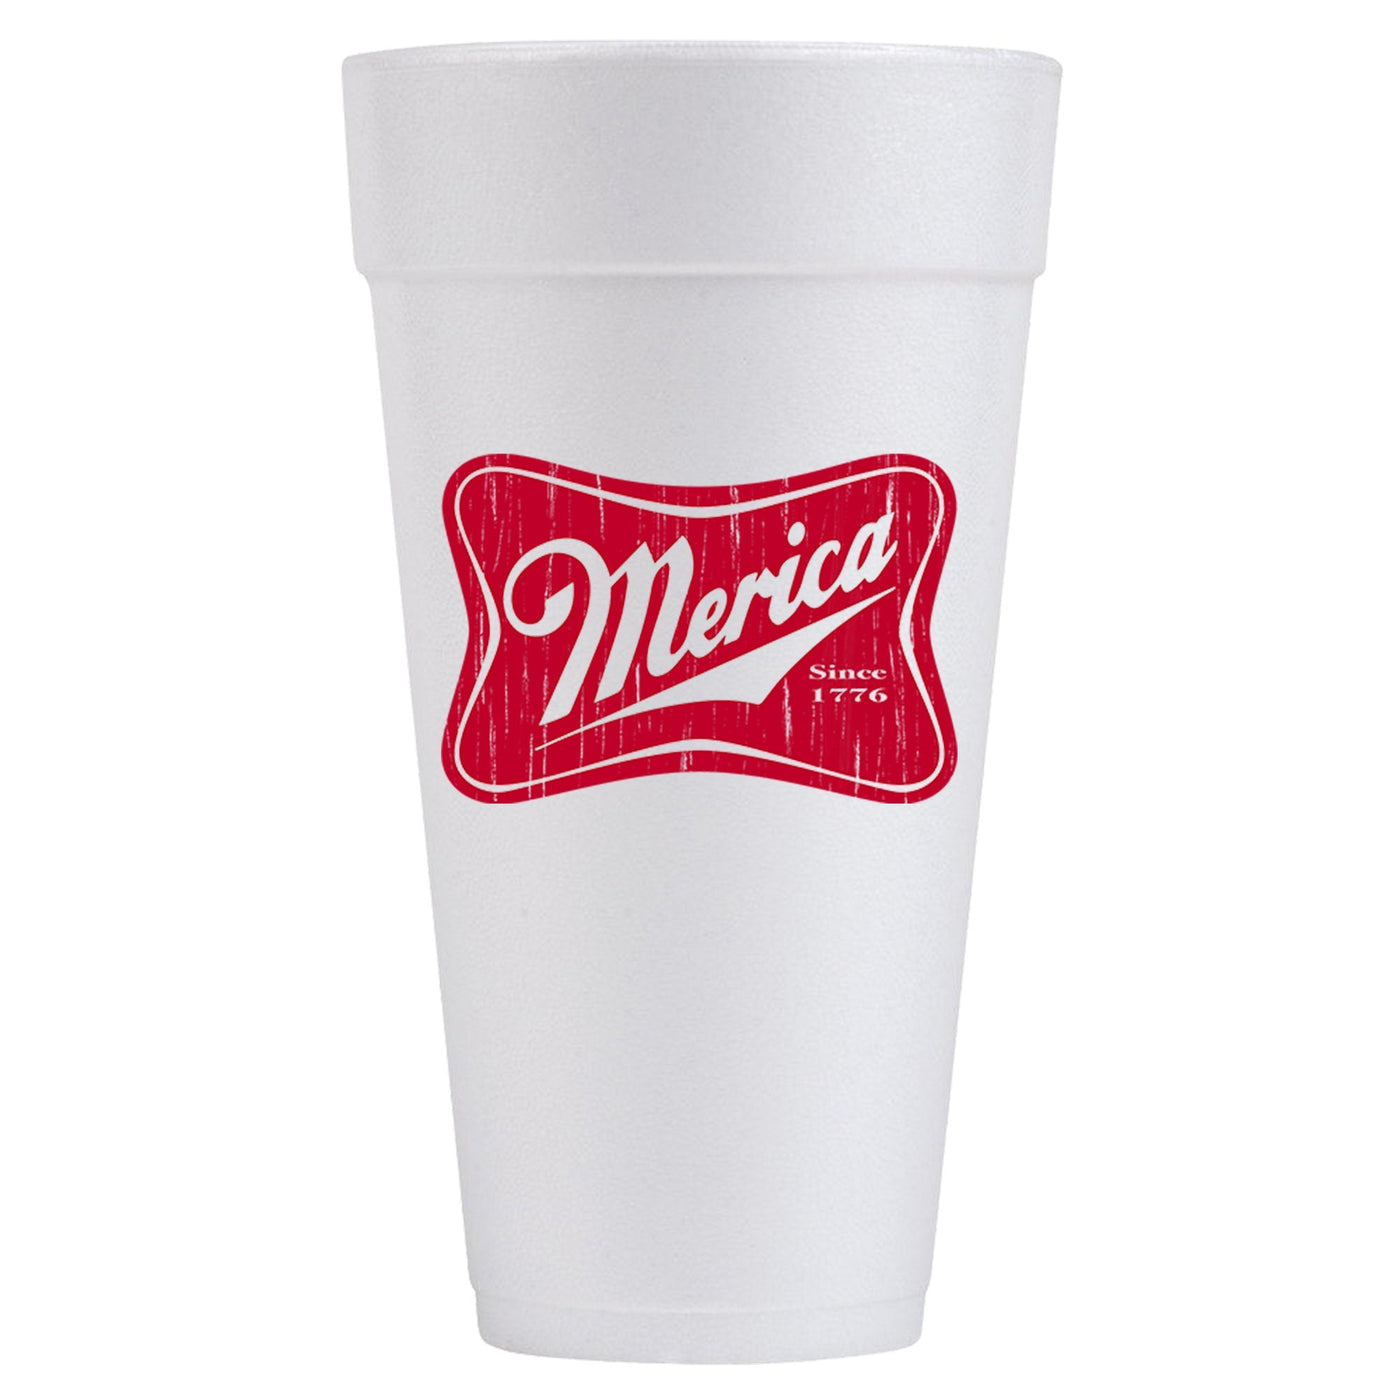 Merica Miller 4th of July Patriotic Personalized Foam Cups - JJ's Party House